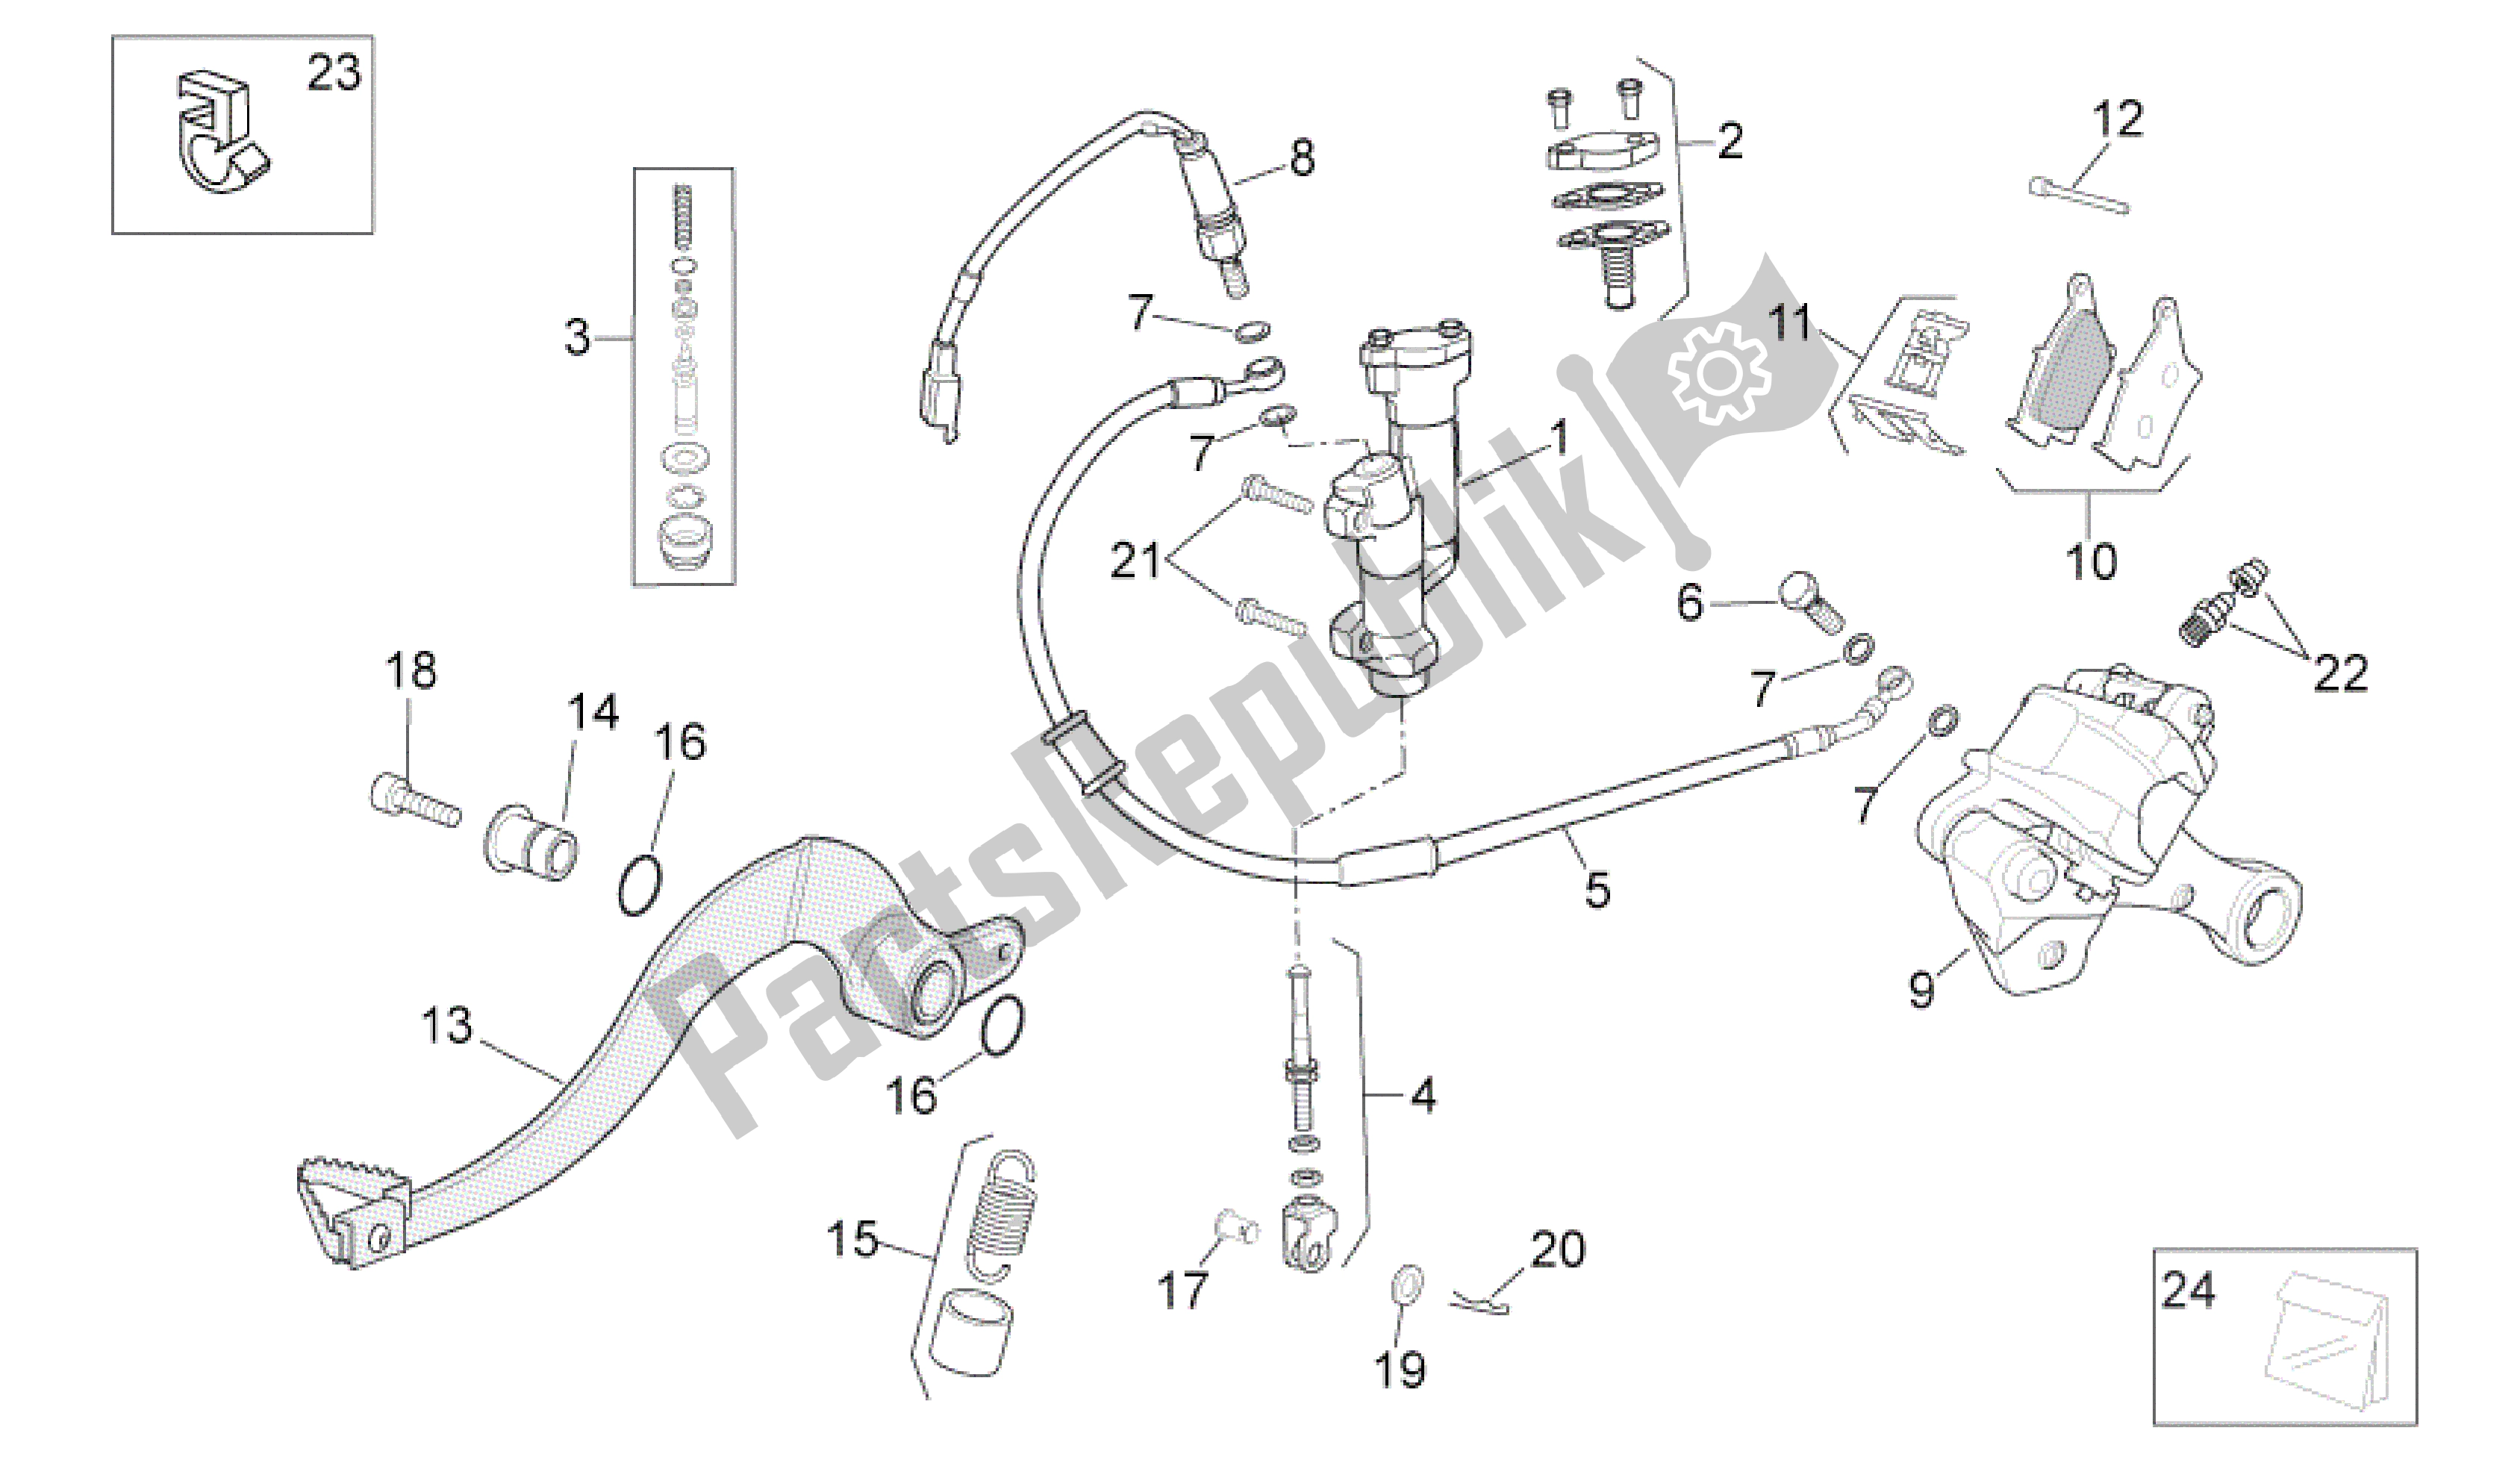 All parts for the Rear Brake System of the Aprilia RXV 450 2009 - 2011